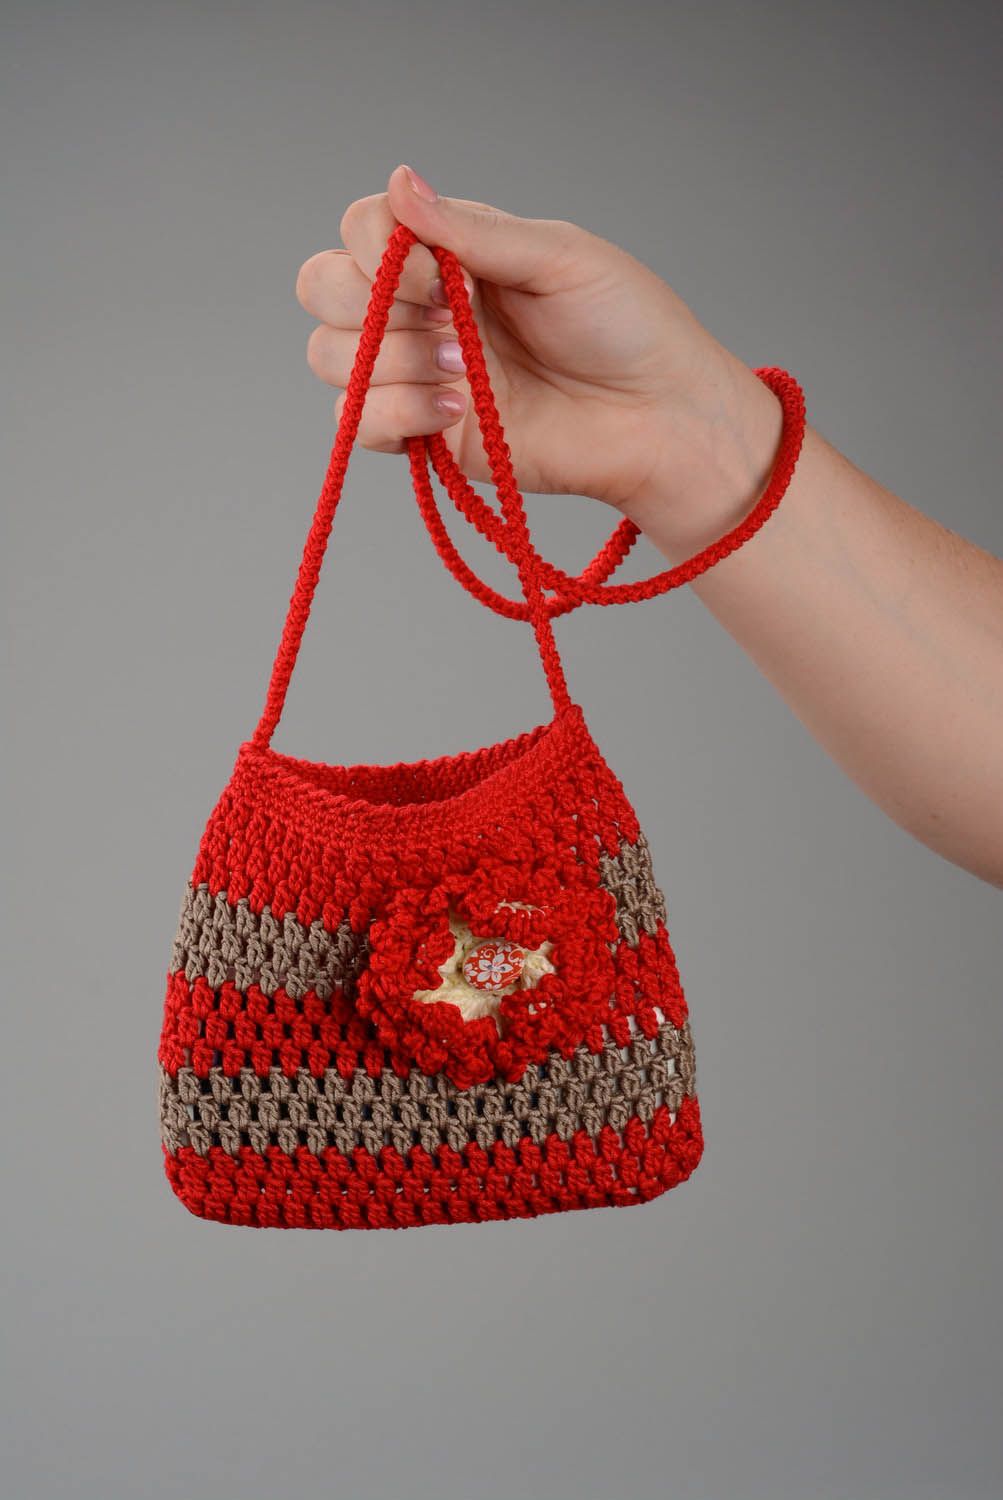 Crocheted purse for baby photo 1